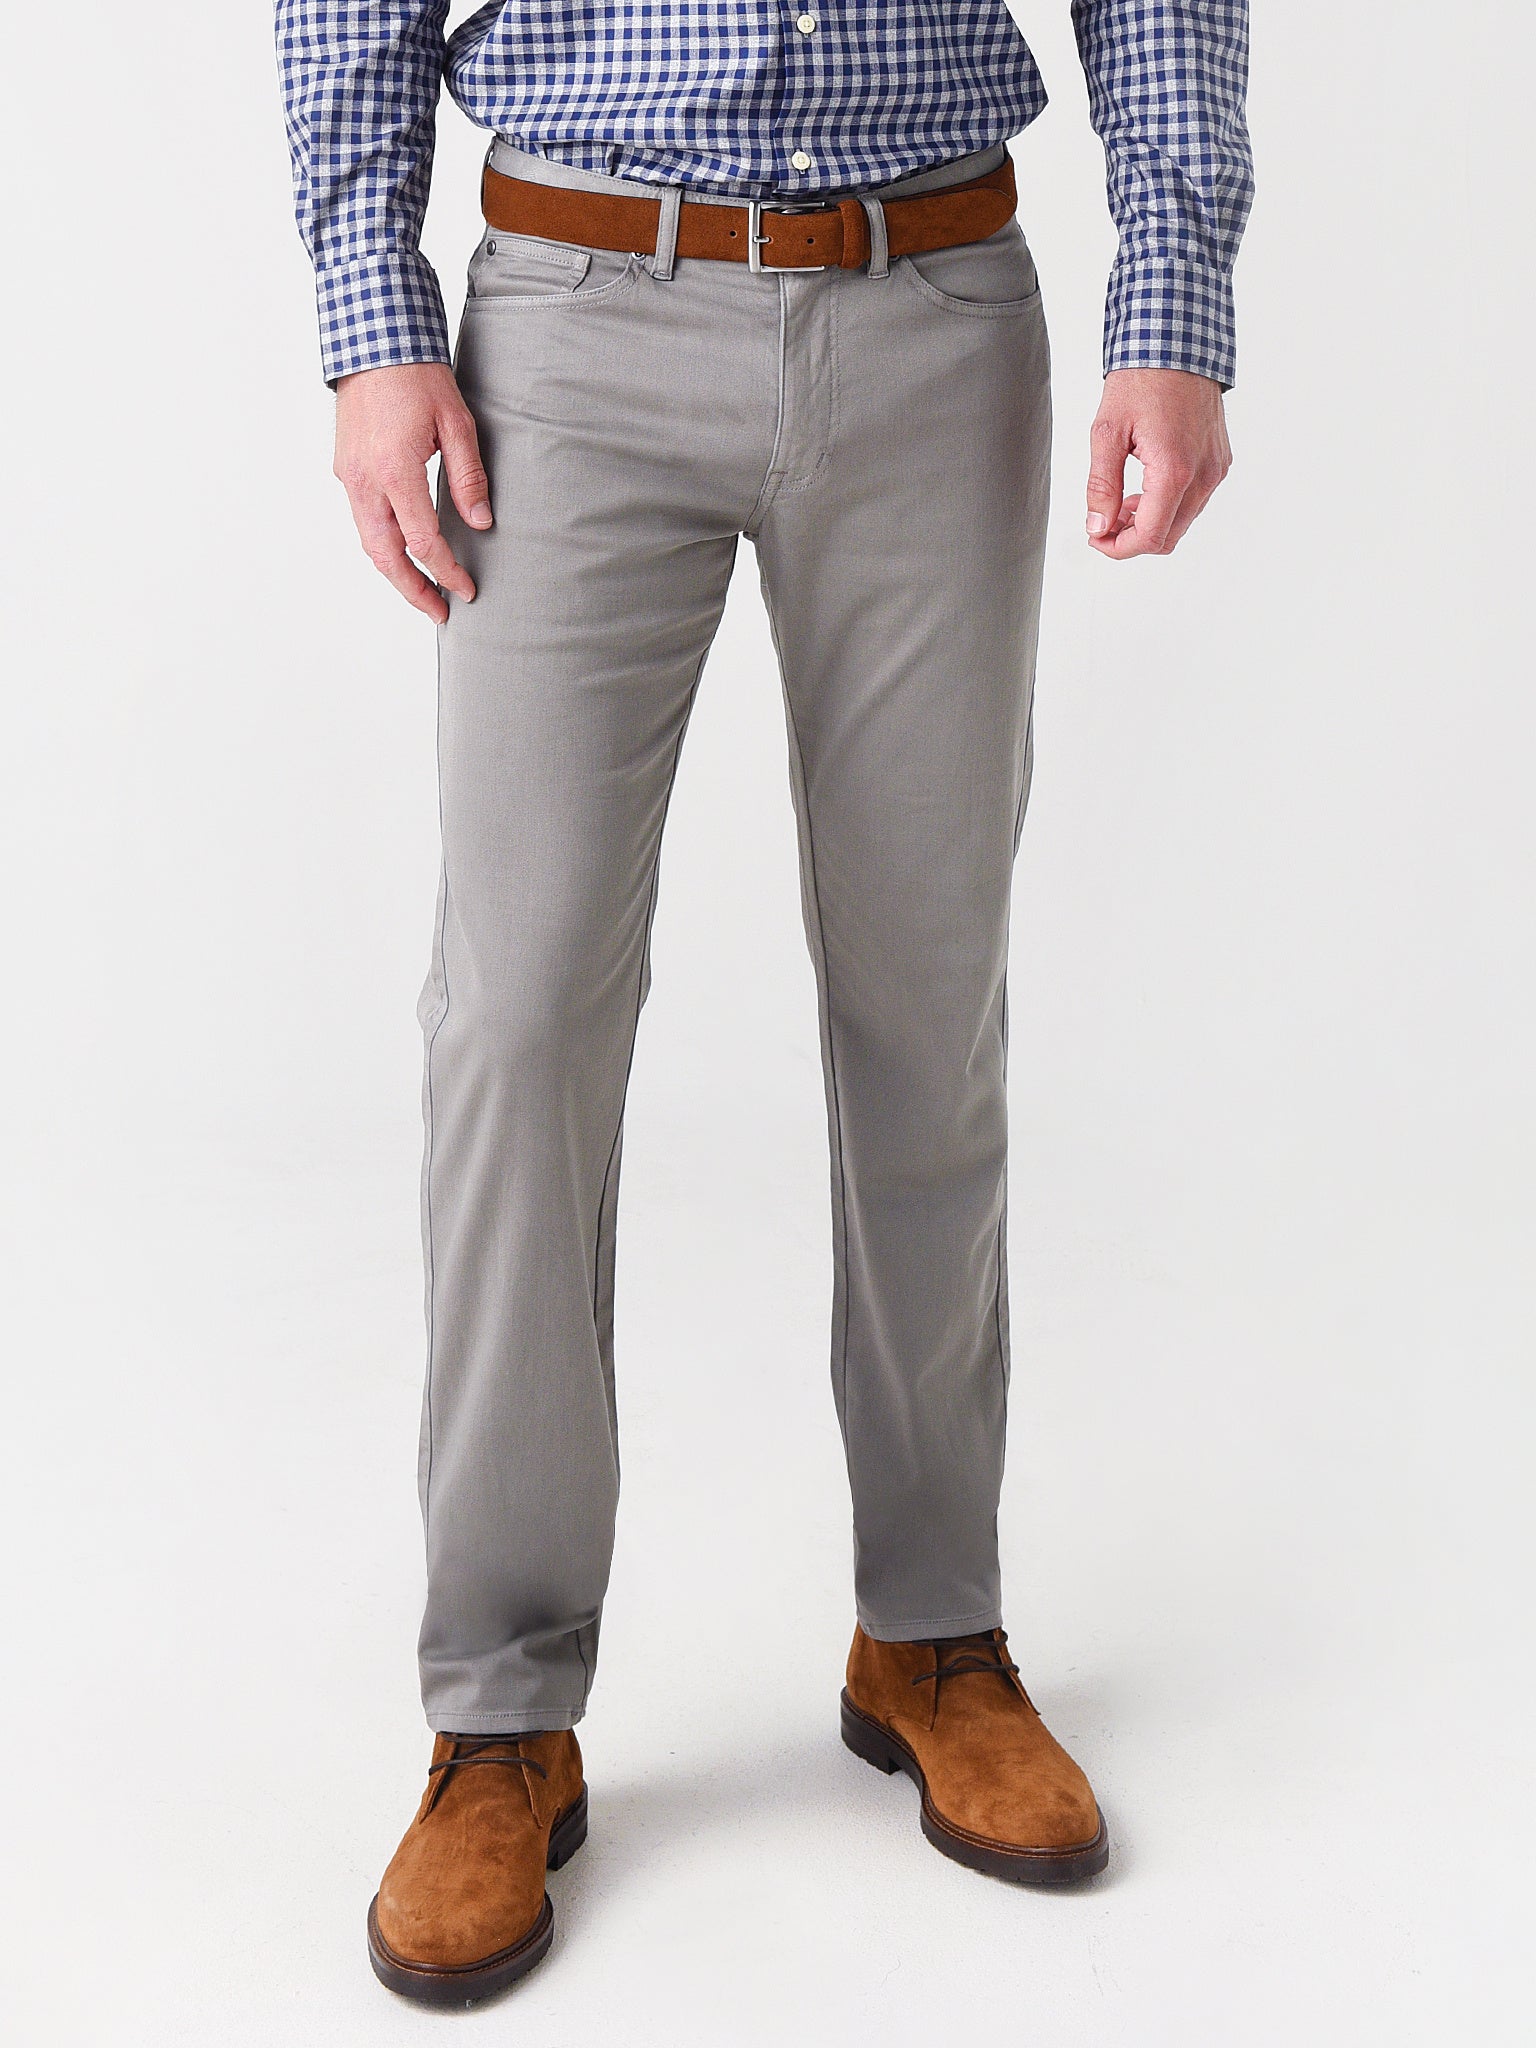 Buy Brown Trousers & Pants for Men by BROOKS BROTHERS Online | Ajio.com